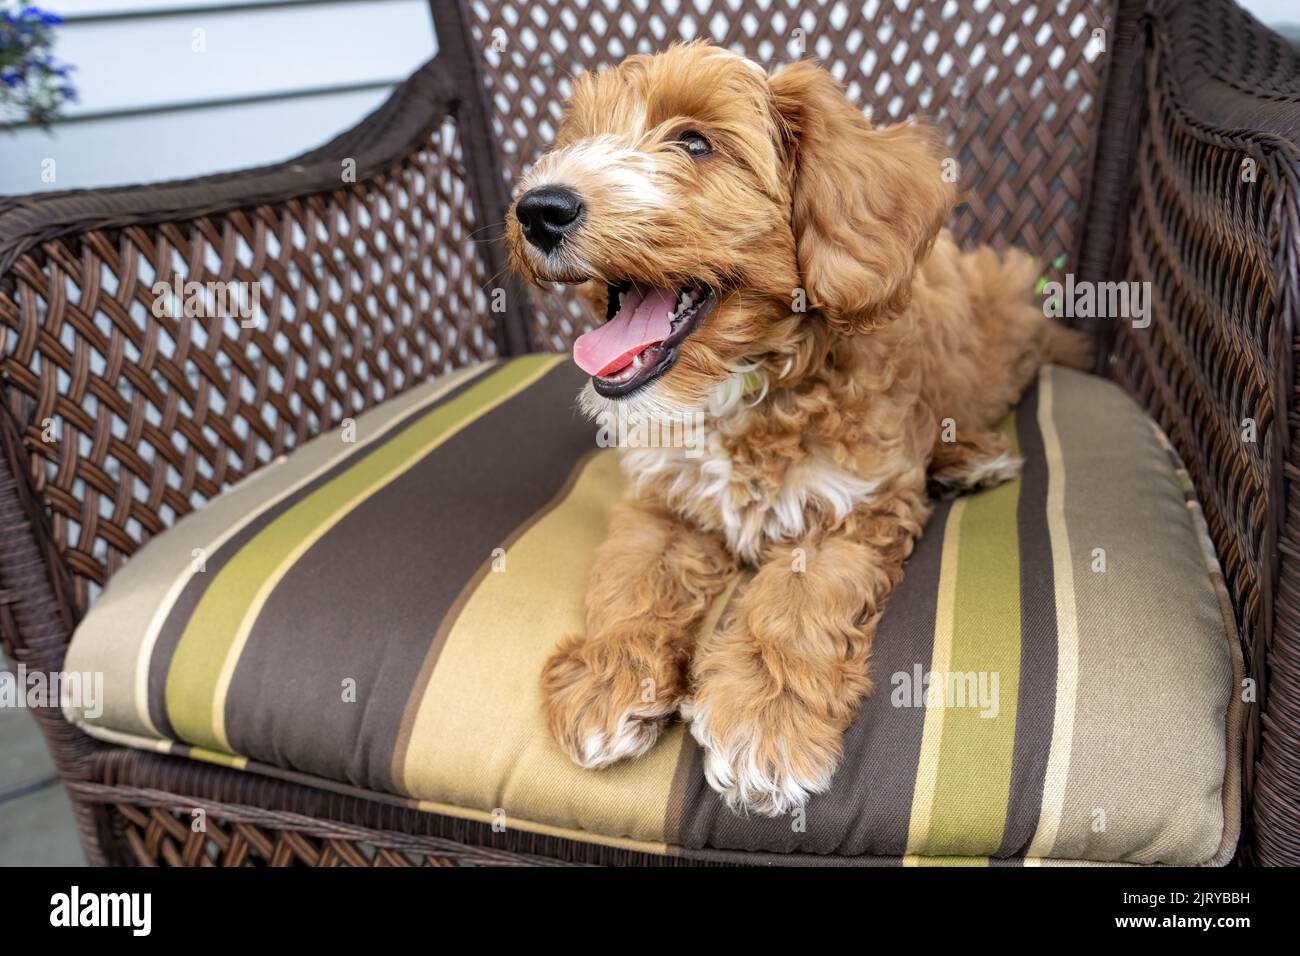 Issaquah, Washington, USA.  3-month old Aussiedoodle puppy named 'Bella' reclining on a chushion of a wicker patio chair.  (PR) Stock Photo